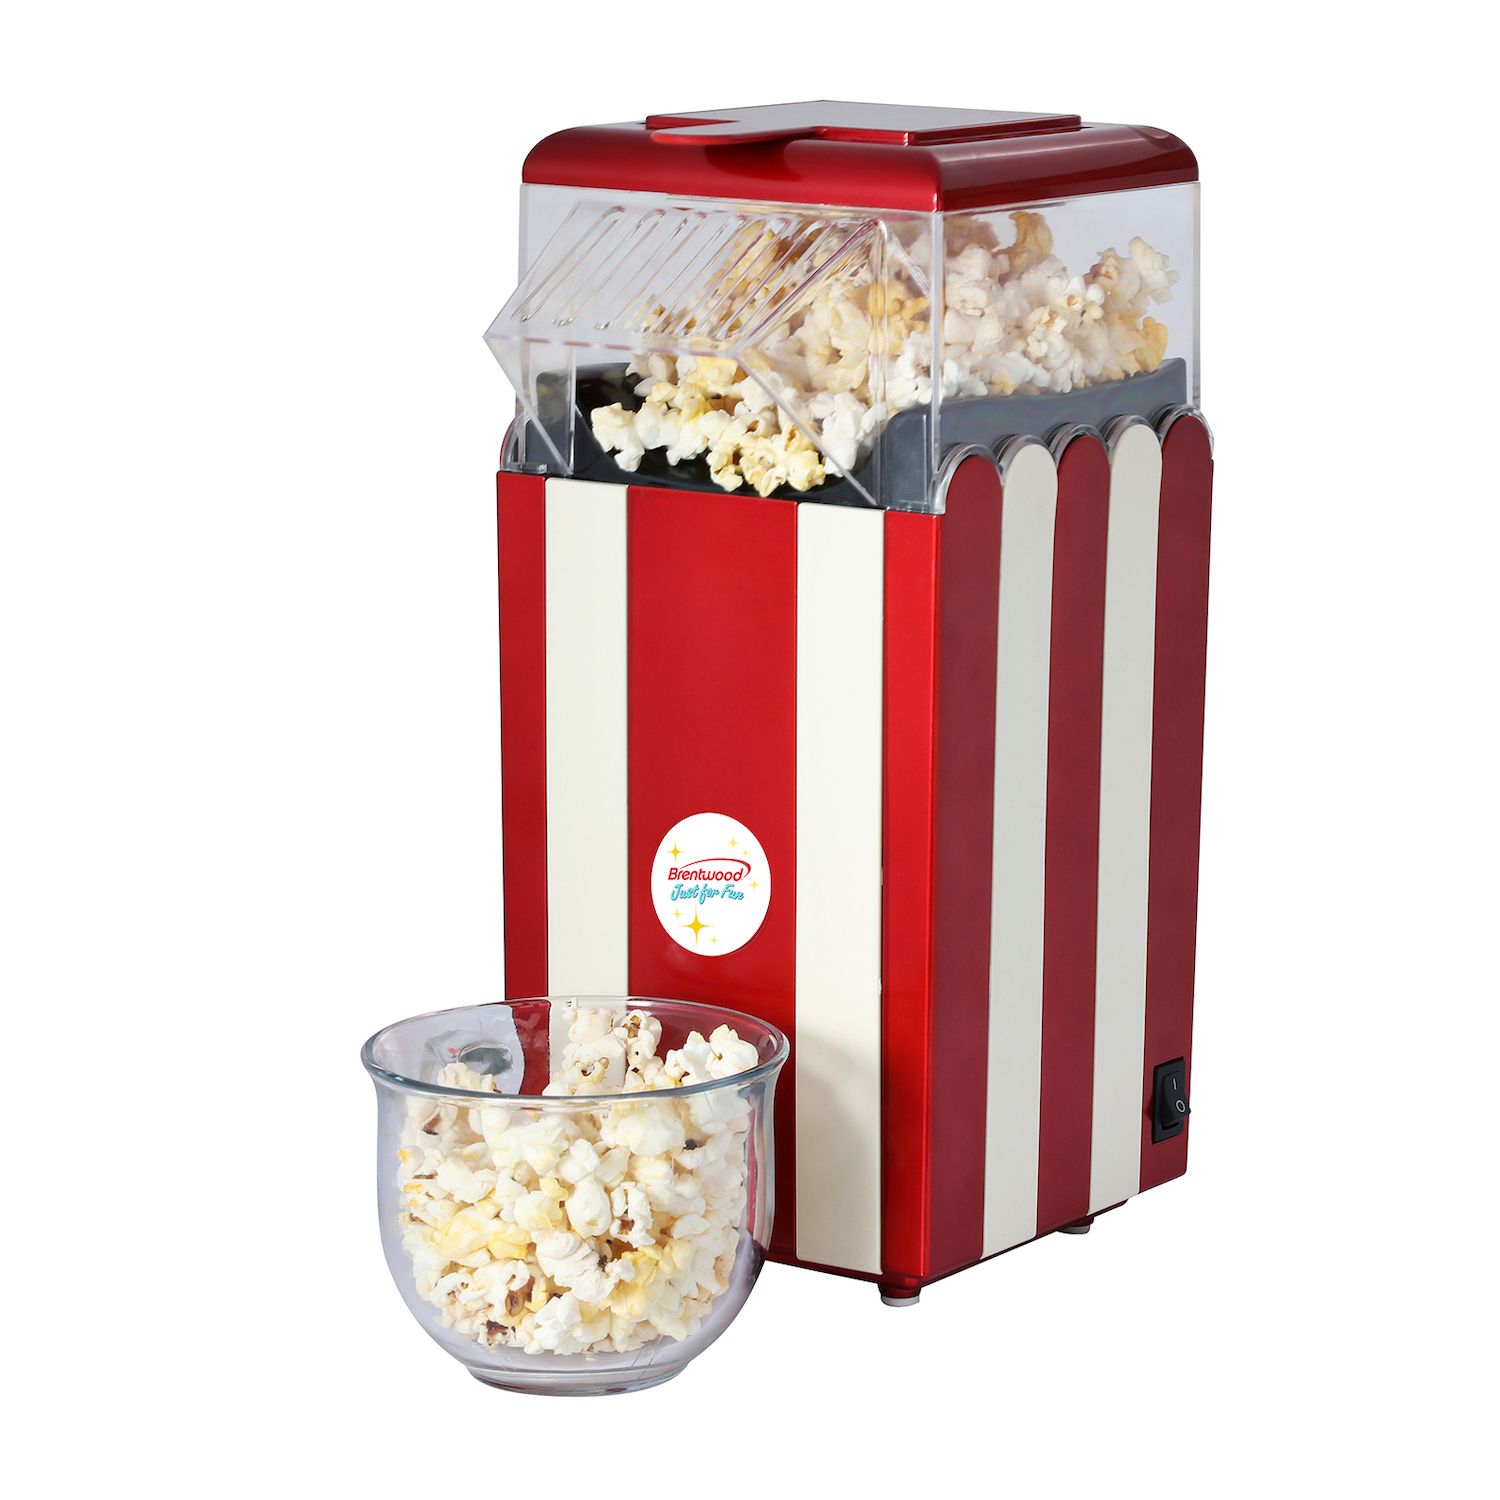 GreenLife Electric Air Popcorn Maker - Red